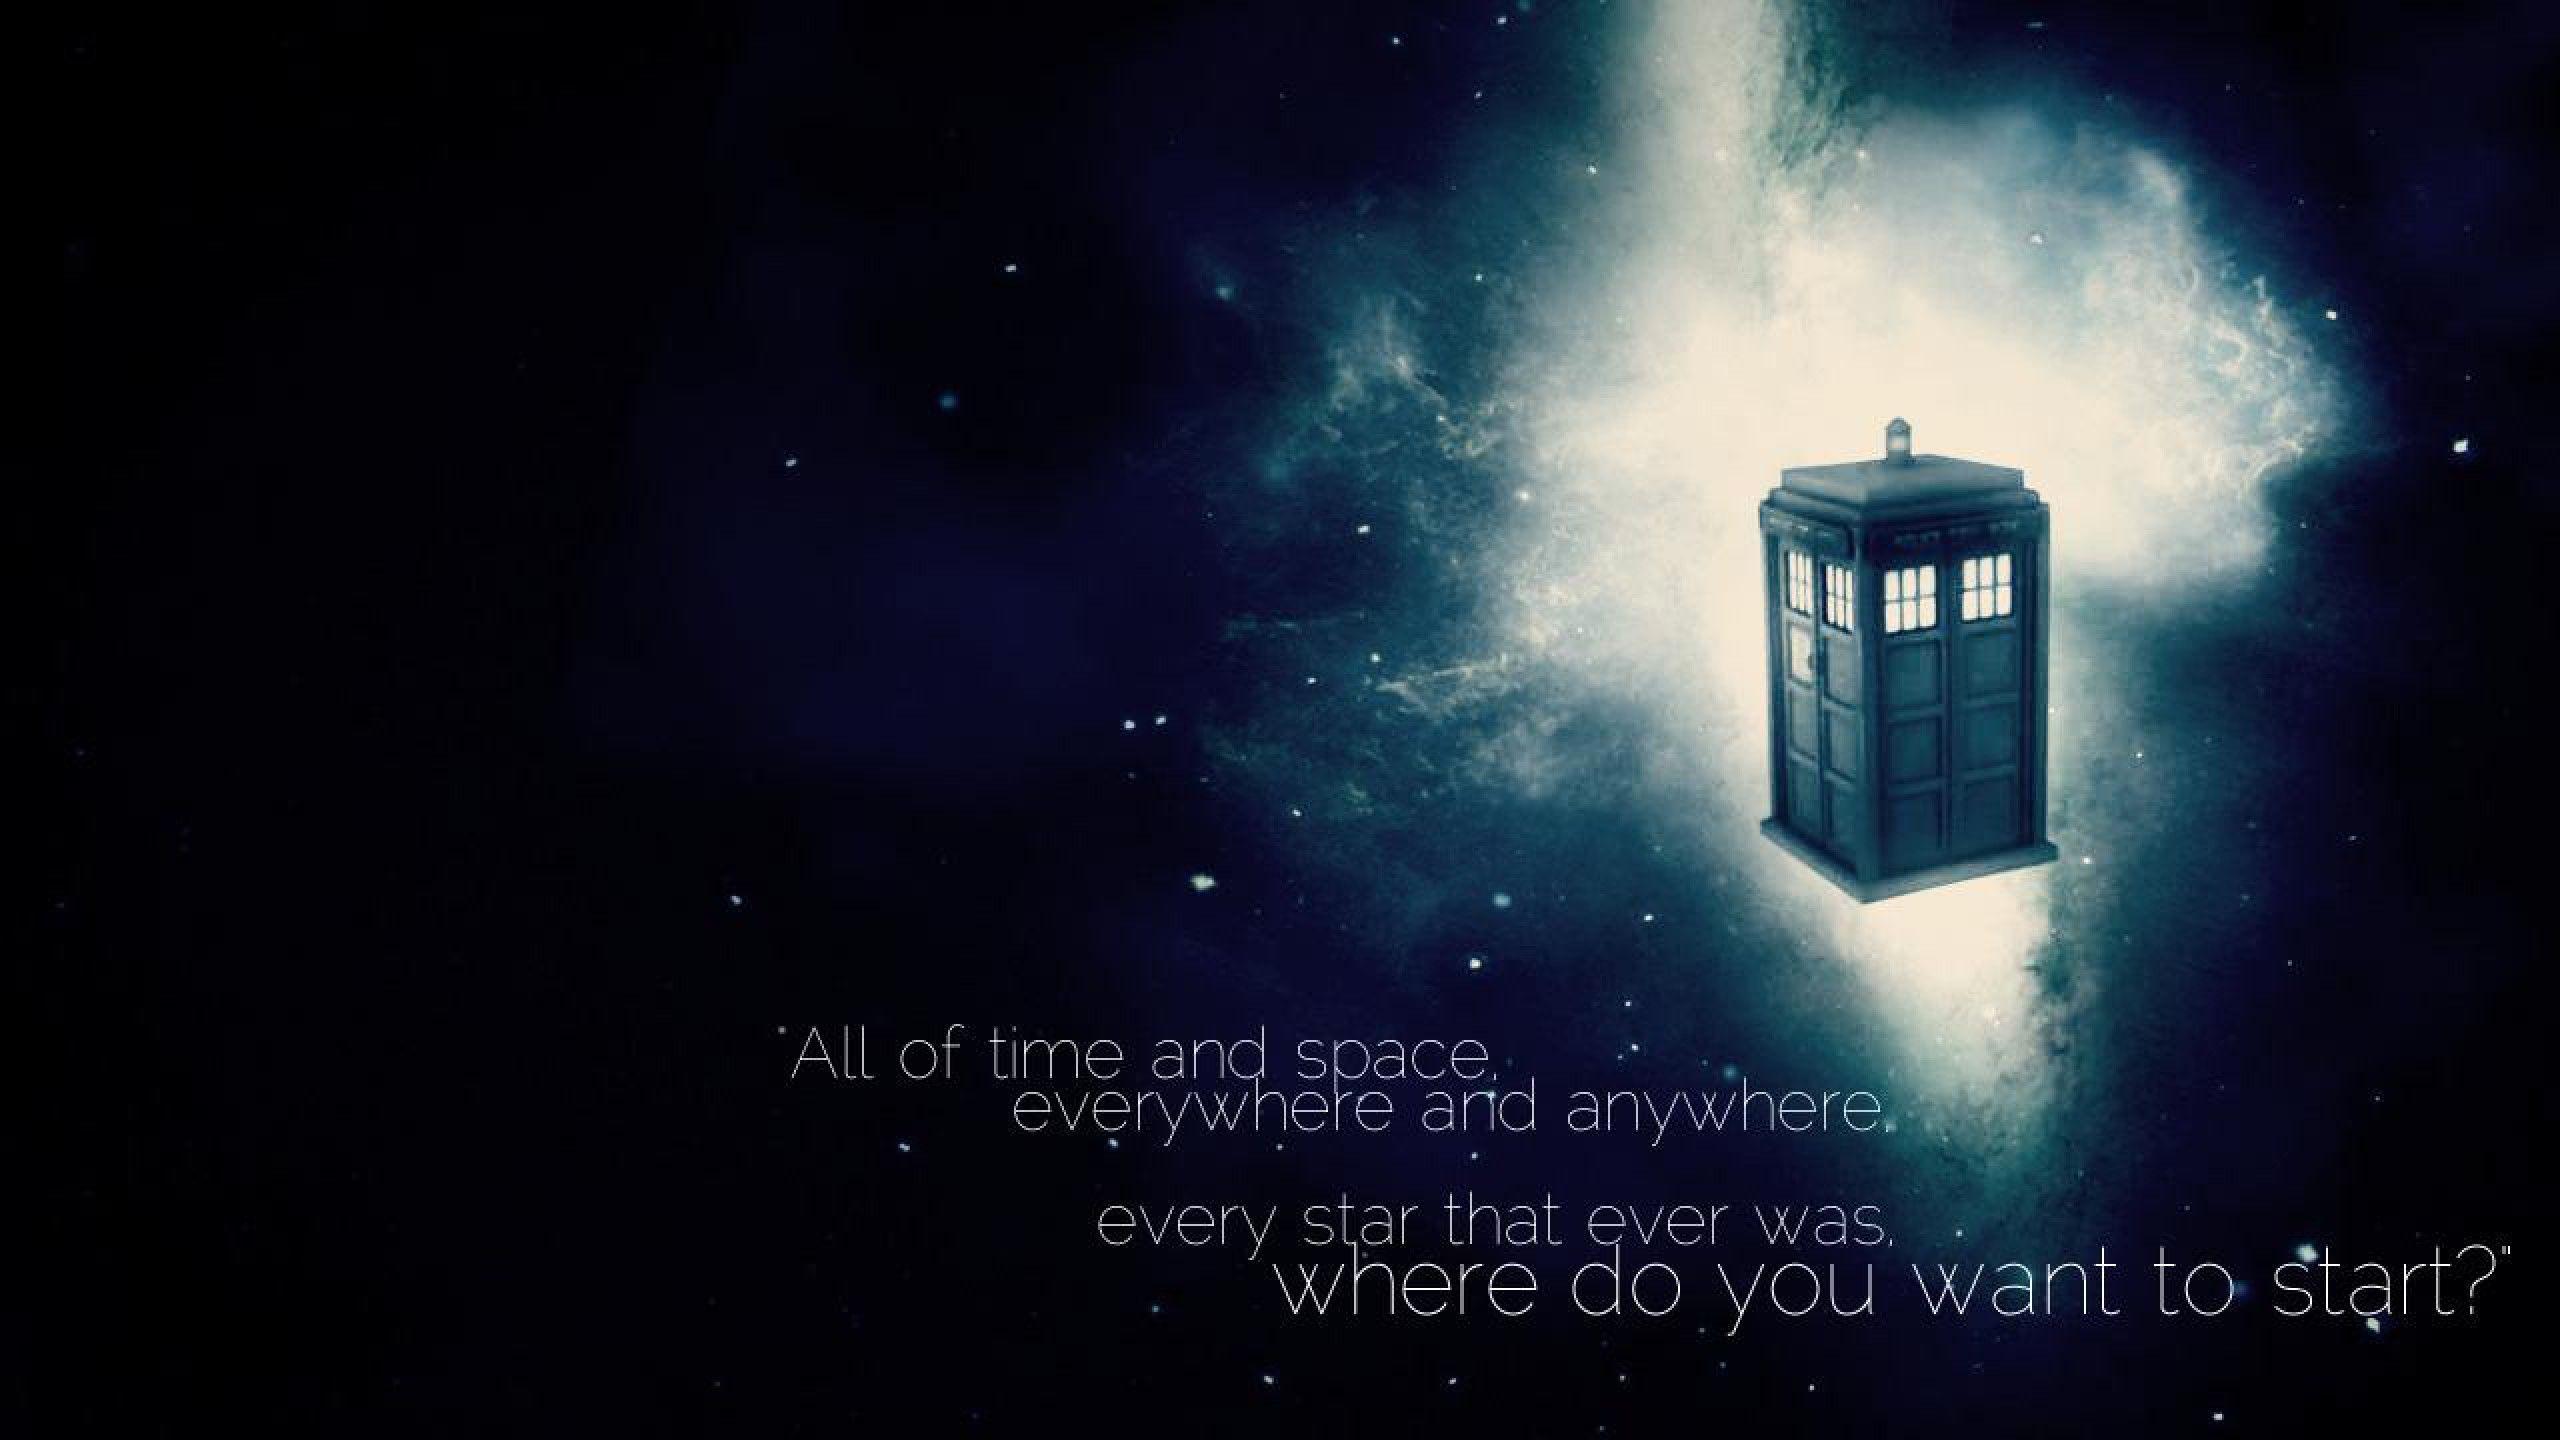 Download Doctor Who Widescreen Smscs Wallpaper 2560x1440. HD